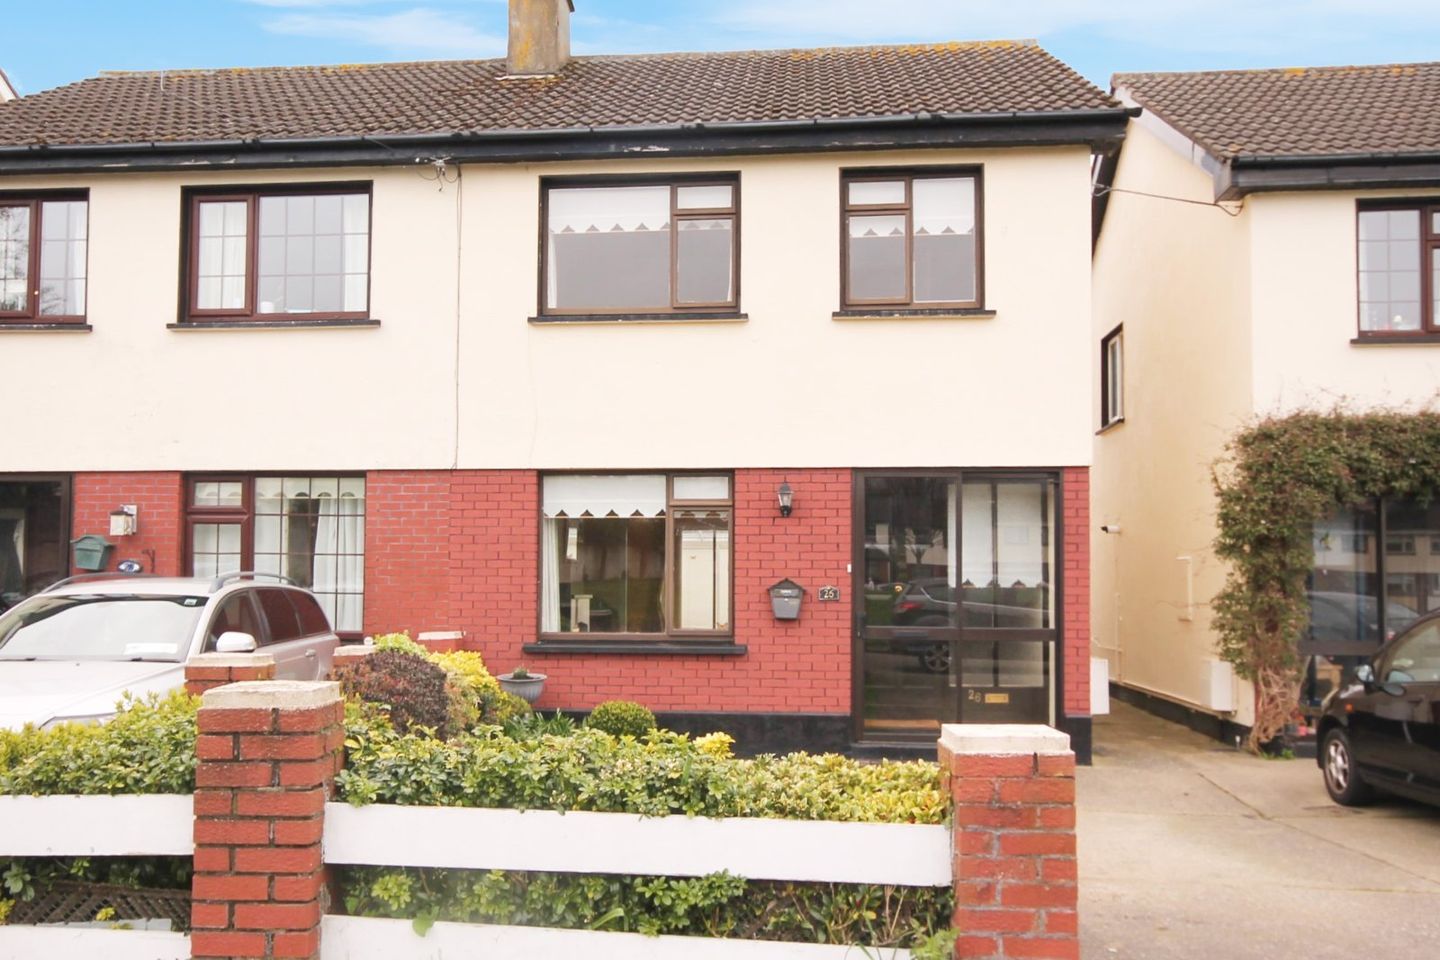 26 New Bentley Park, Bray, Co. Wicklow, A98KT97